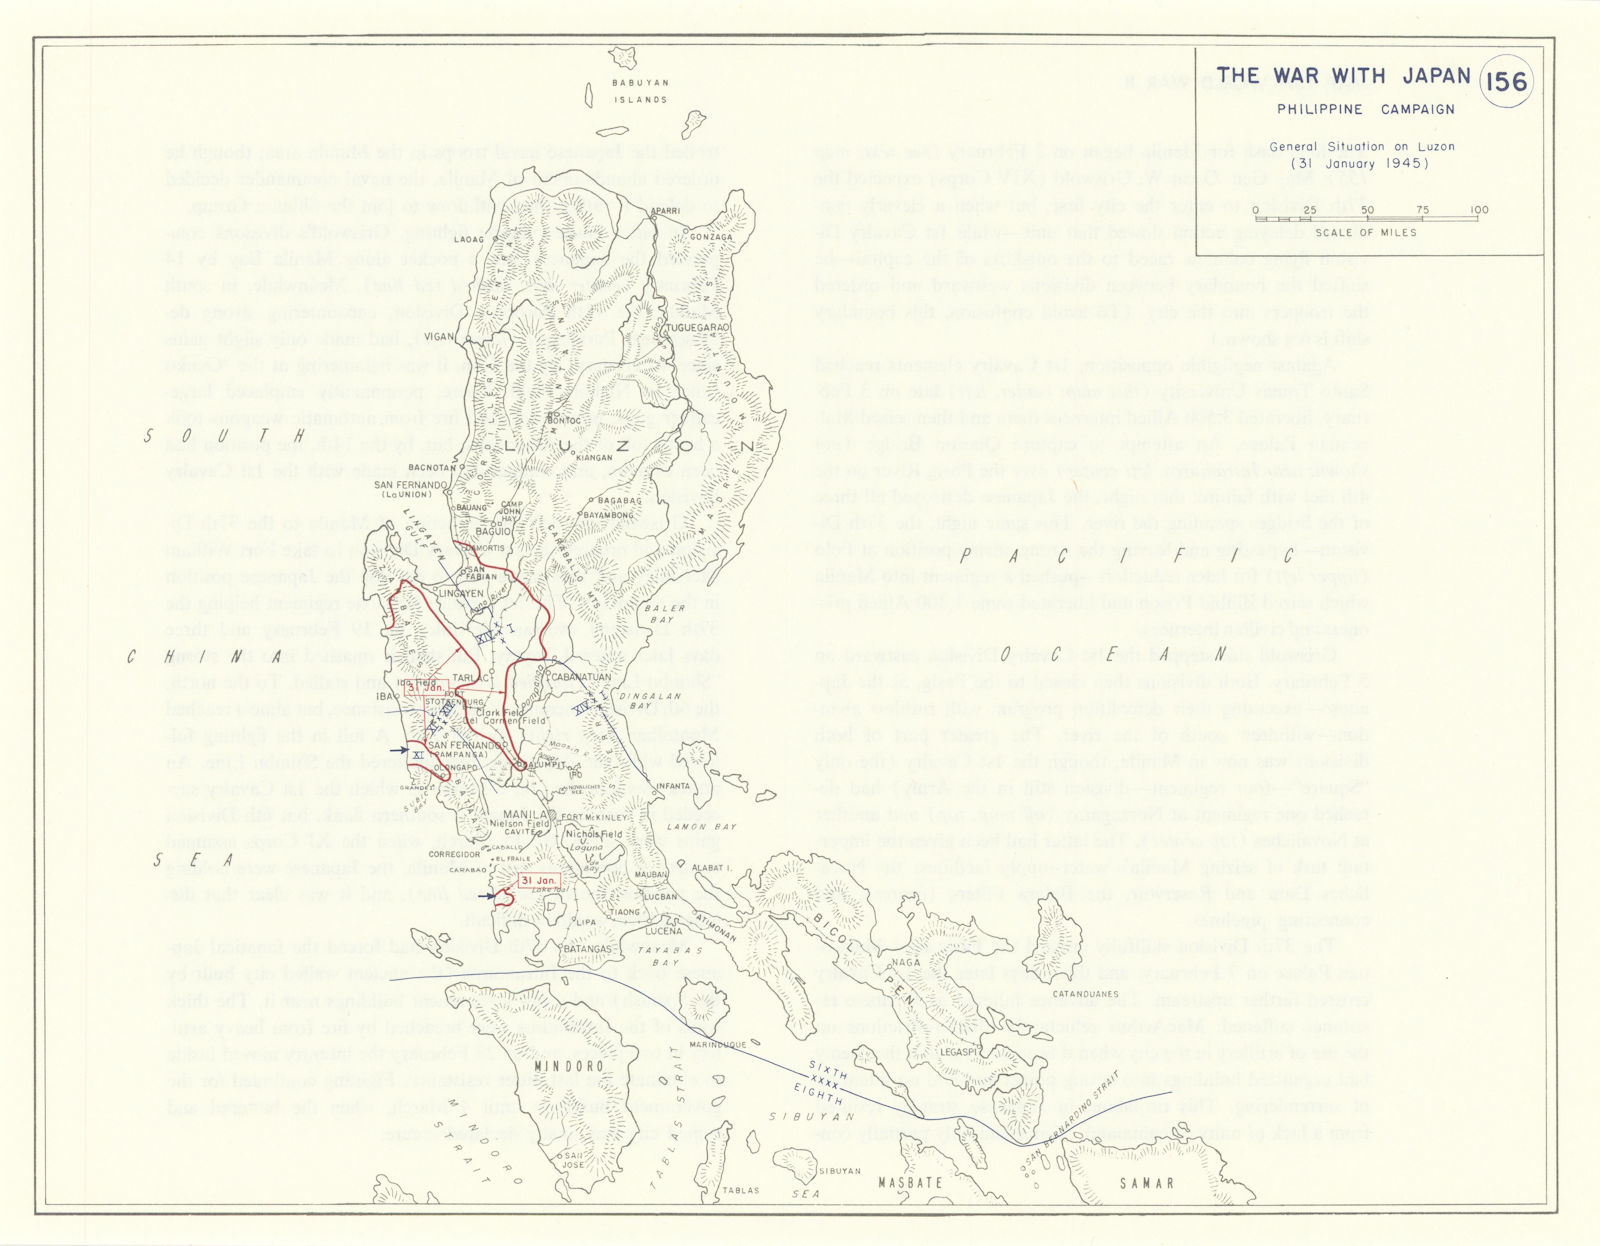 World War 2. Philippine Campaign. 31 January 1945 Luzon situation 1959 old map